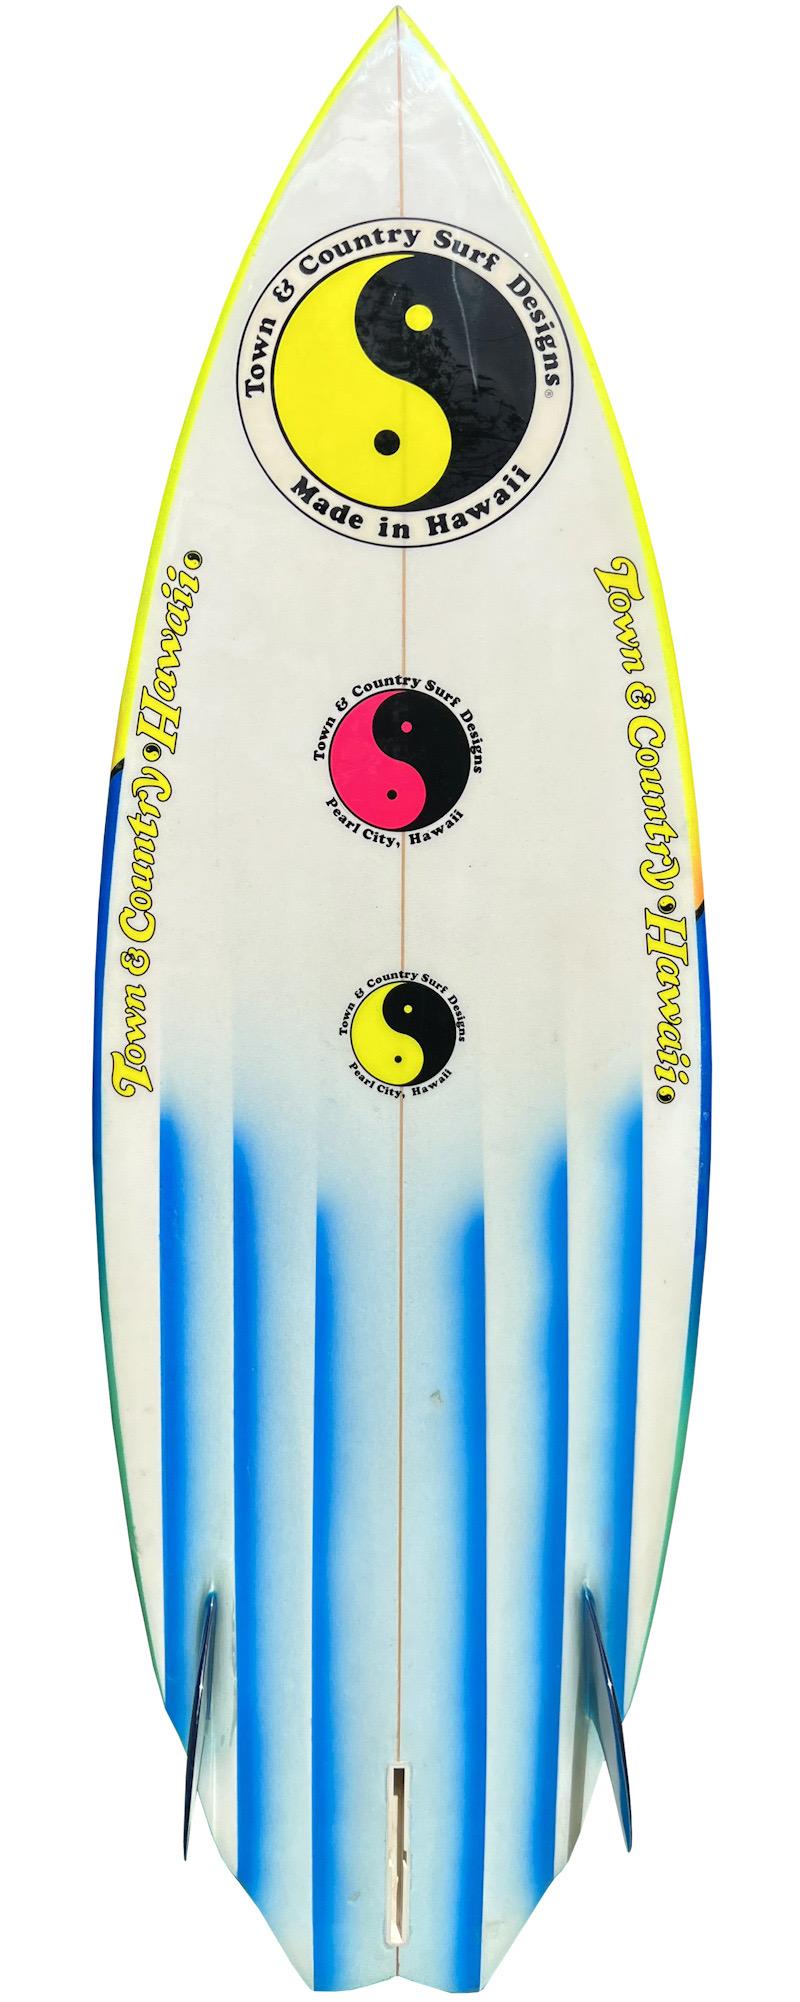 1983 Town and Country (T&C) shortboard made by Dave Wallace. Features a vibrant airbrush design indicative of the 1980s. Double wing swallow-tail shape design with distinct channel bottom. 2+1 fin setup. An incredible example of a colorful 1980s